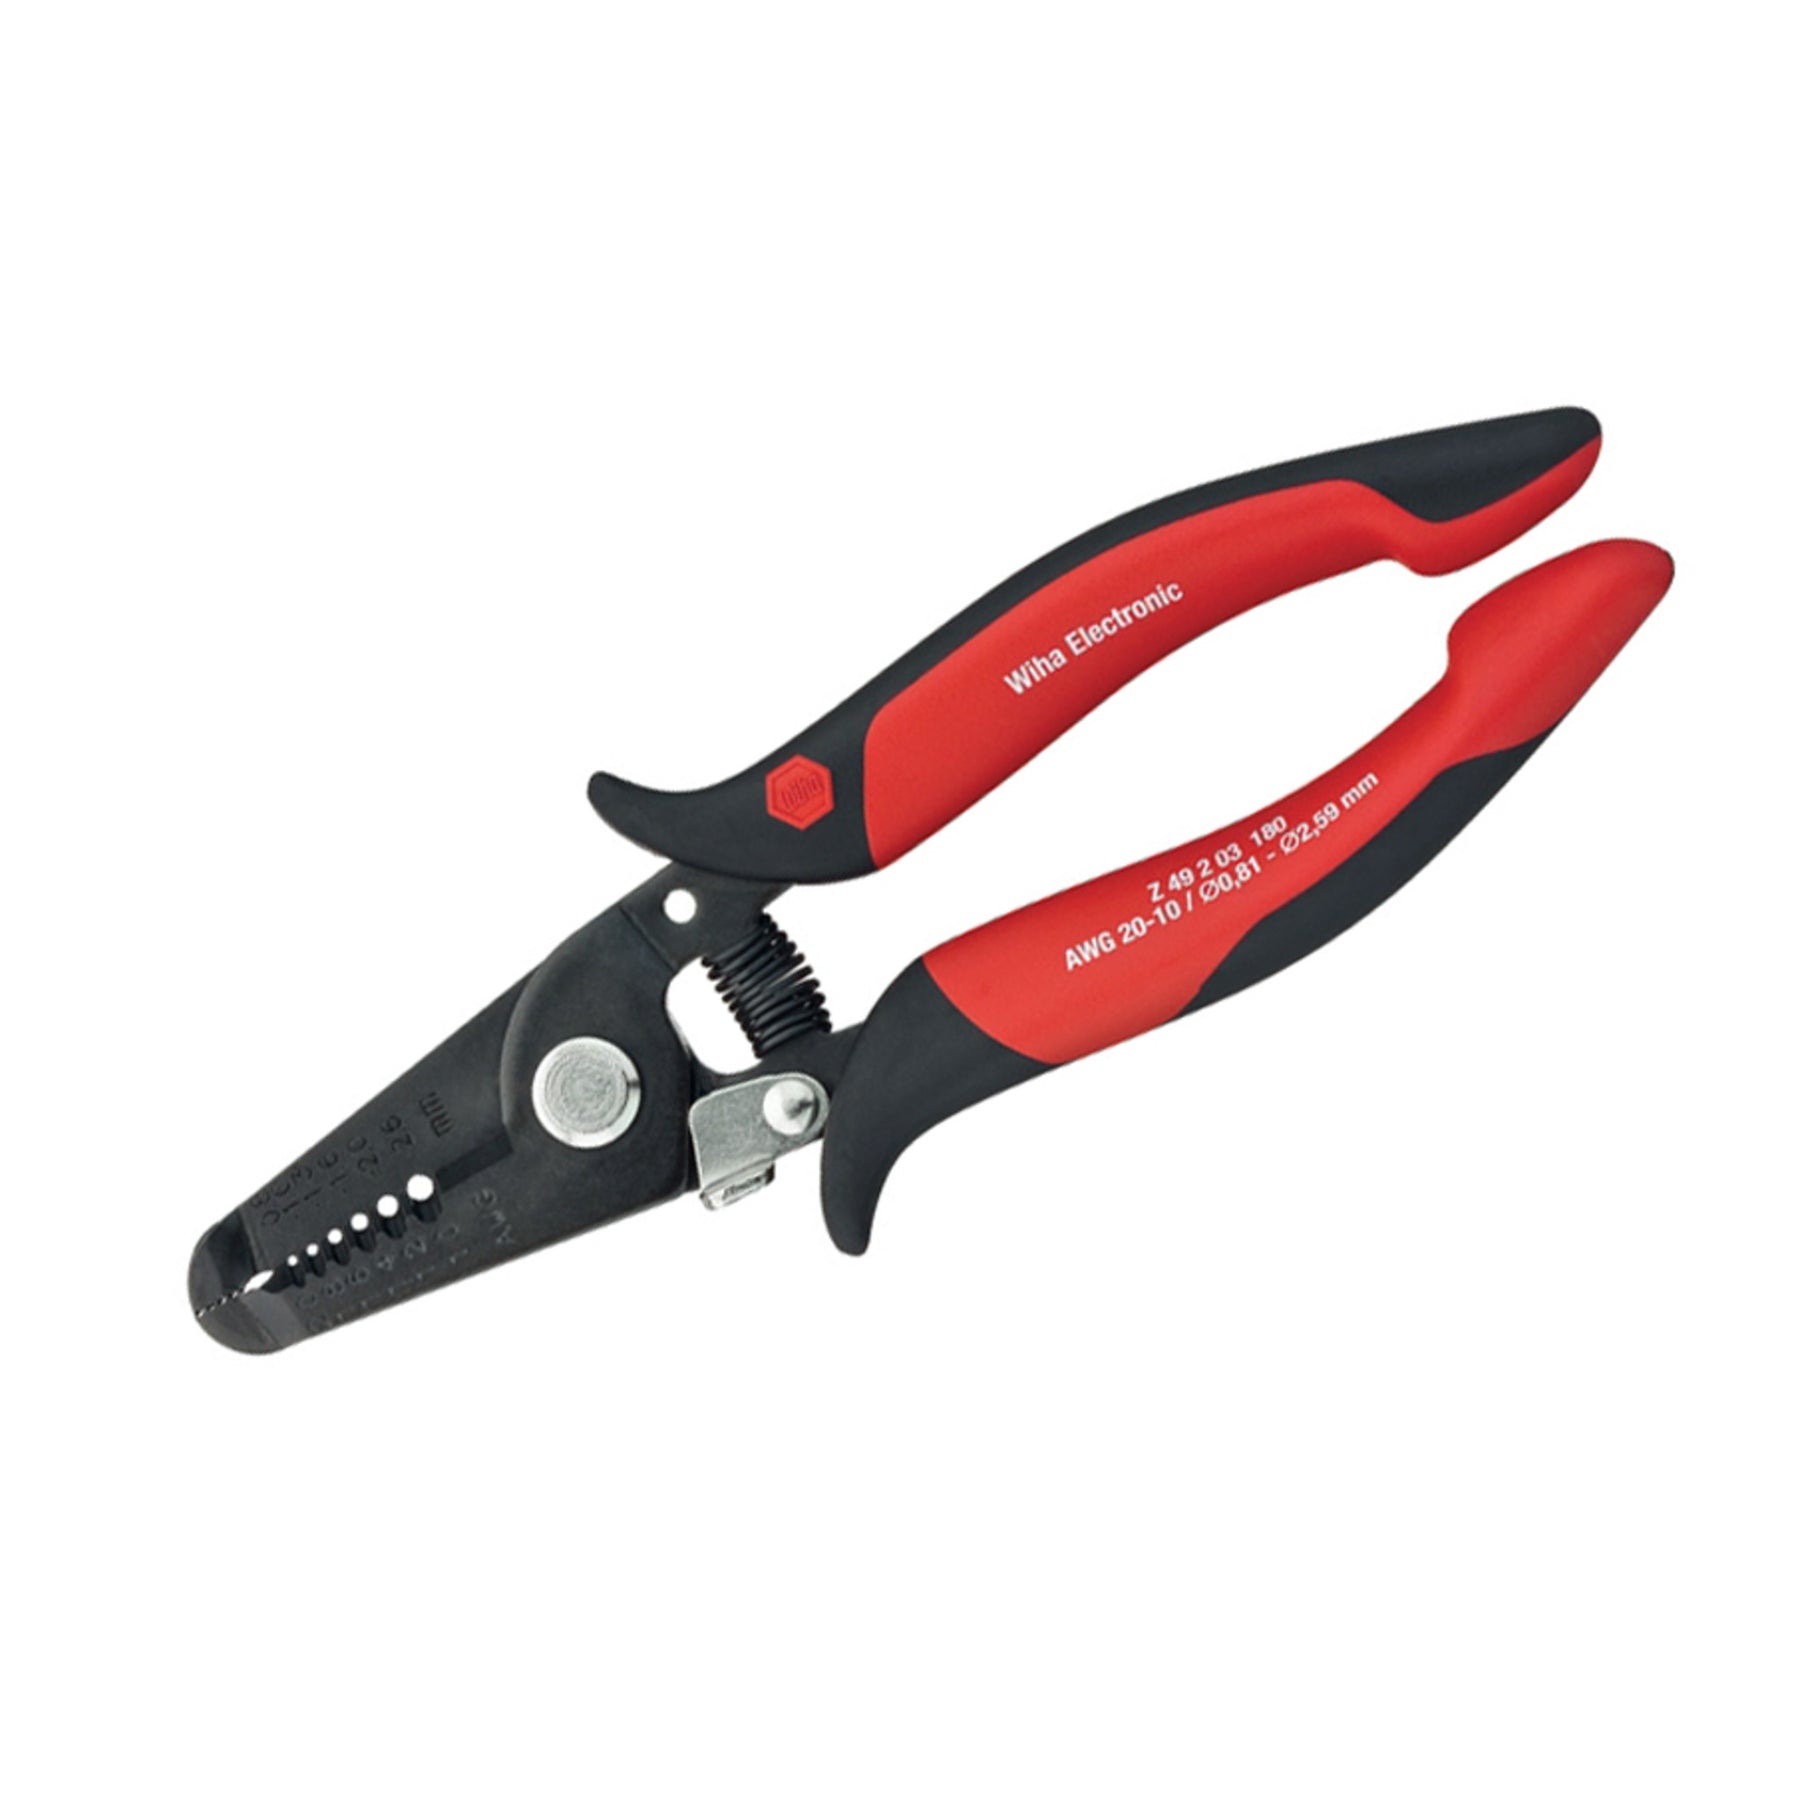 Wiha 56871 Electronic Precision Stripping Pliers 7.0"